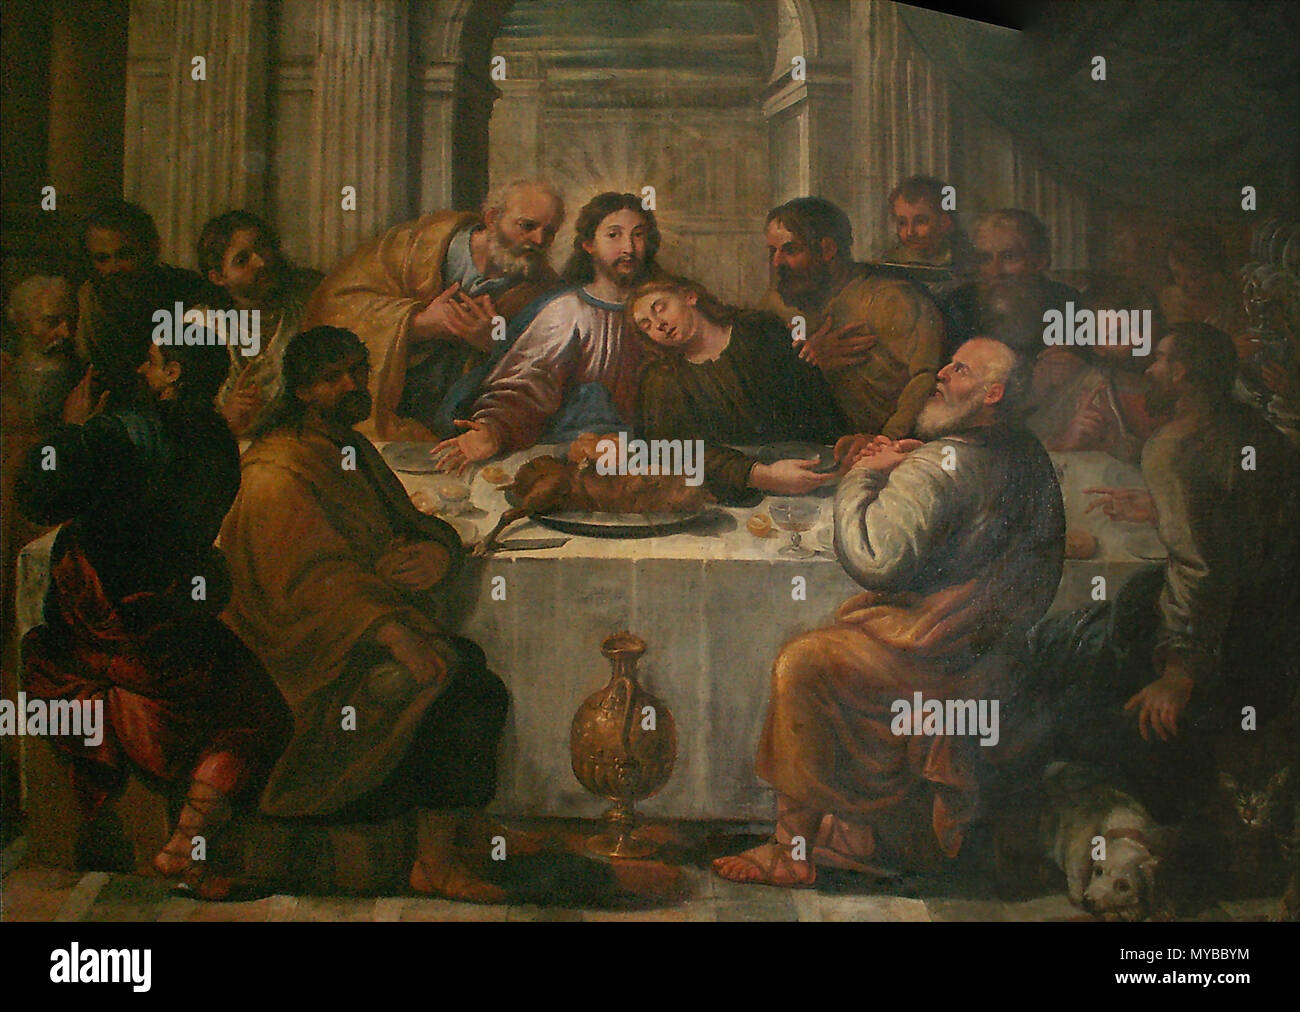 . English: The Last Supper by Palma il Vecchio, National Gallery for Foreign Art, Sofia, Bulgaria . 20 May 2006. Edal Anton Lefterov 525 TheLastSupperPalmaVecchio Stock Photo